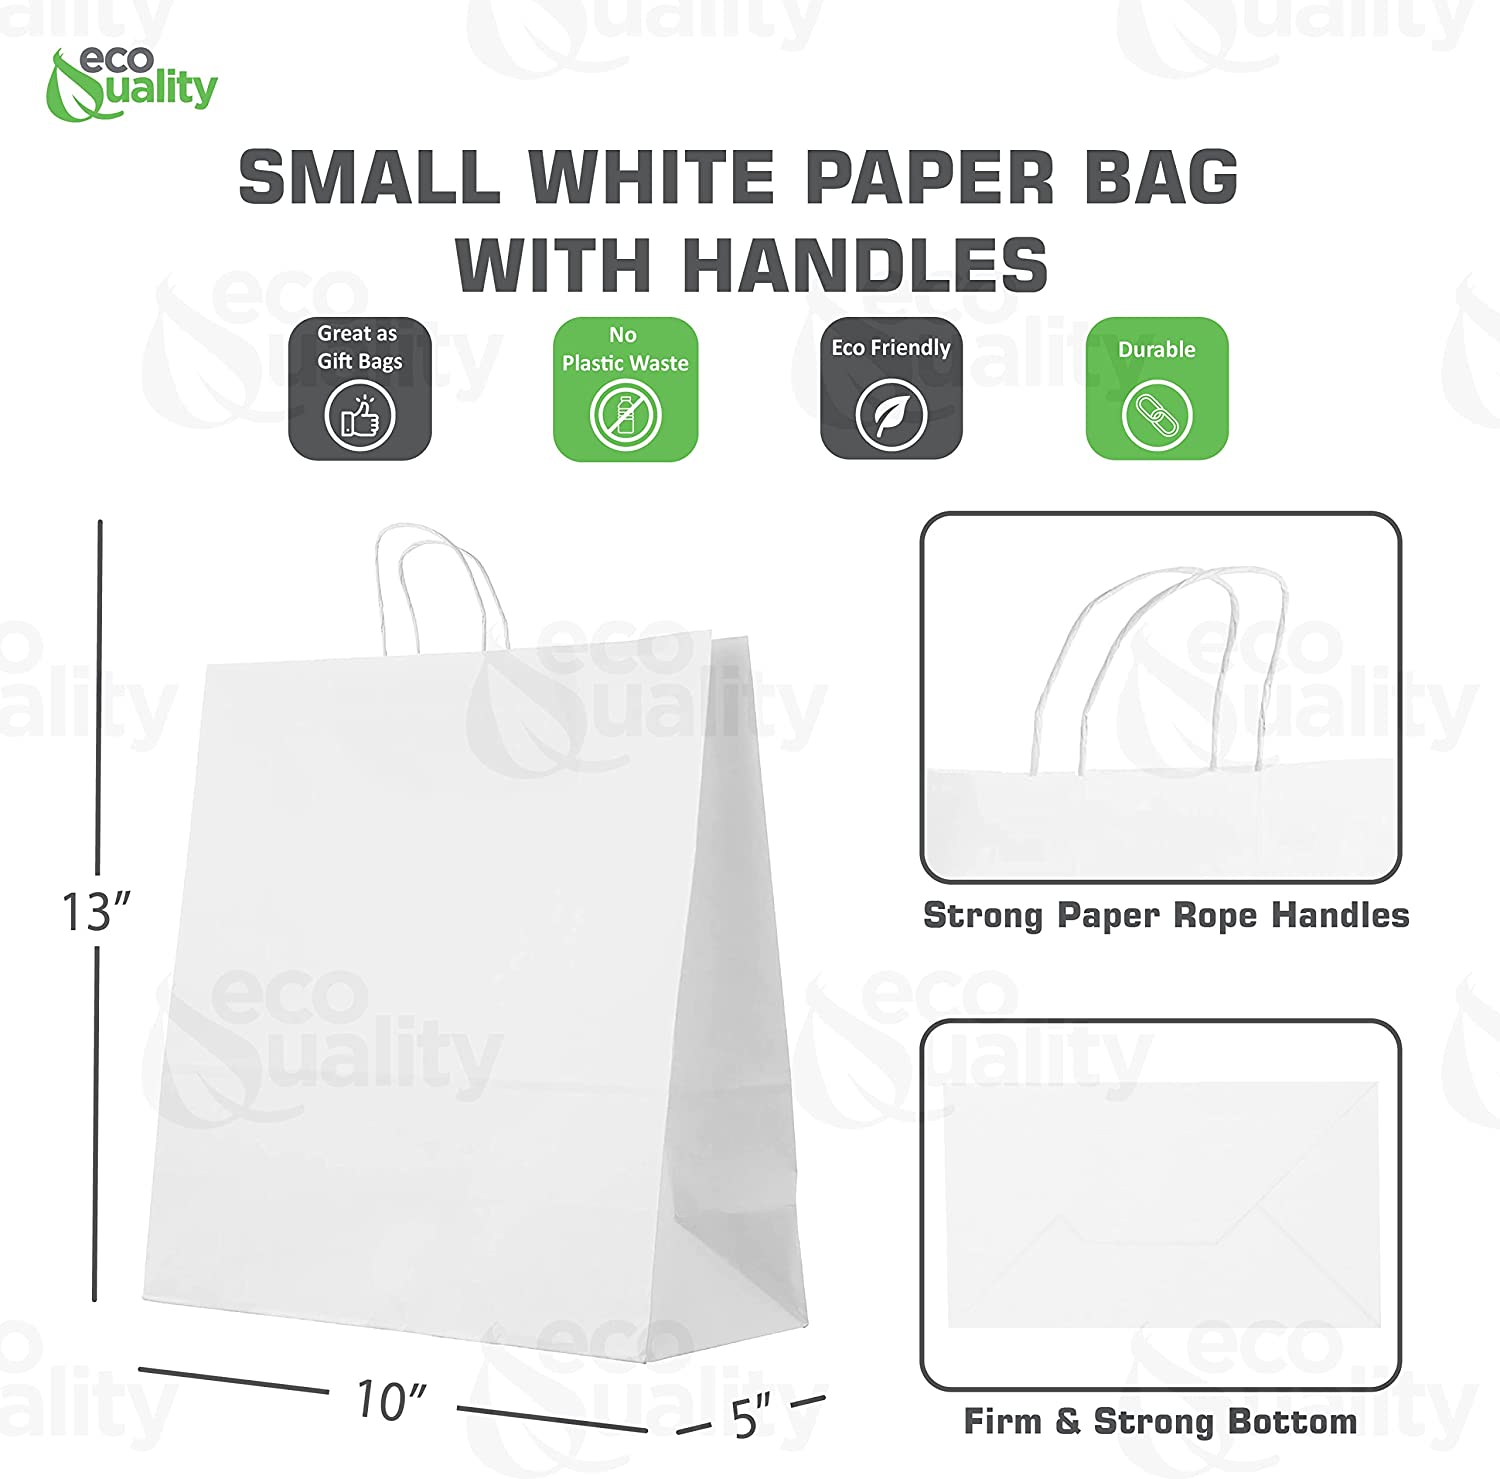 Reusable Recycled Material  12 Pounds  White Gift Bag  DYI Paper Bag  Heavy Duty Strong Paper Bag  Supermarket paper bags  carry out bags  Paper Bags with handles  Paper Take Out  Grocery Bags  White Kraft Bags  Ecofriendly Paper Bag  Retail Merchandise bag  white Paper Shopping Bags  takeout bag  Paper Bag  Disposable small  10x5x13 inches 